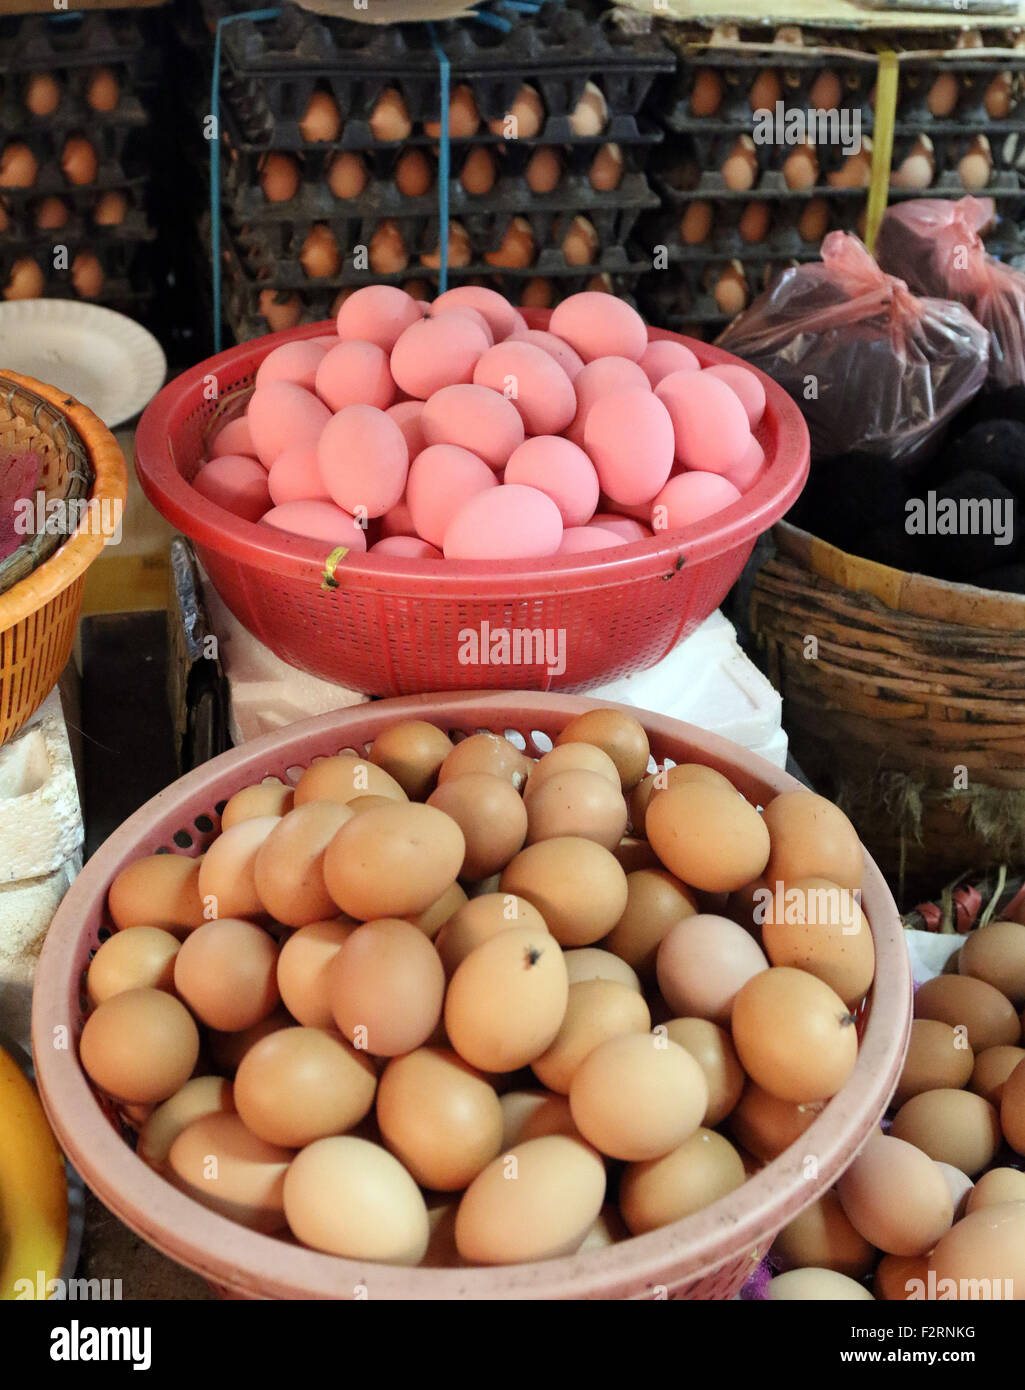 pink eggs for sale market stall bowl Stock Photo